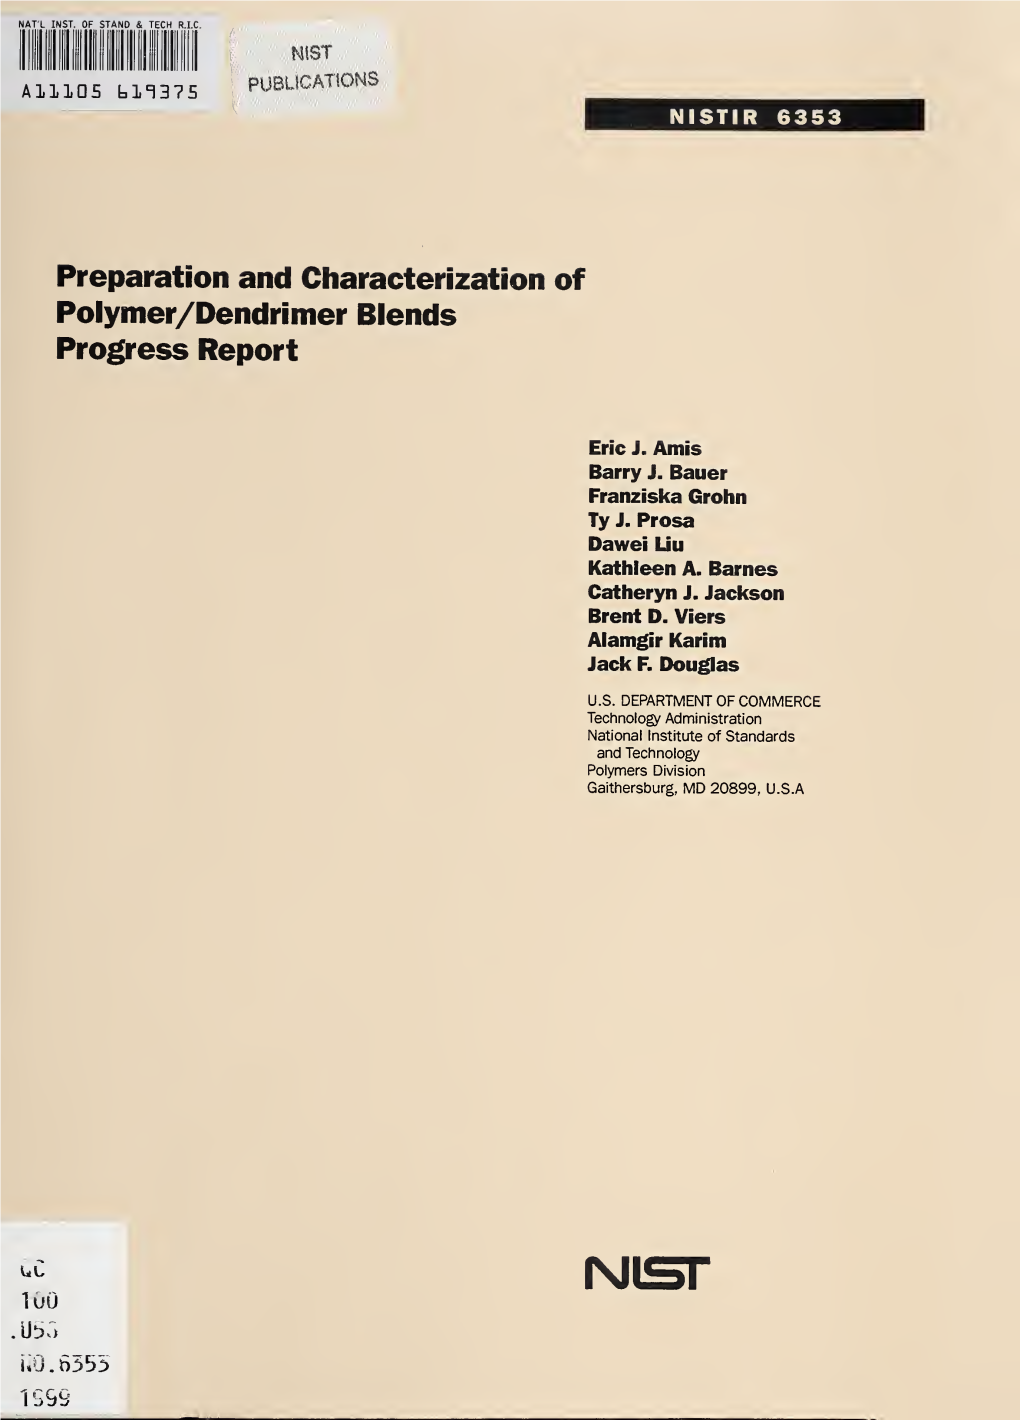 Preparation and Characterization of Polymer/Dendrimer Blends, Progress Report